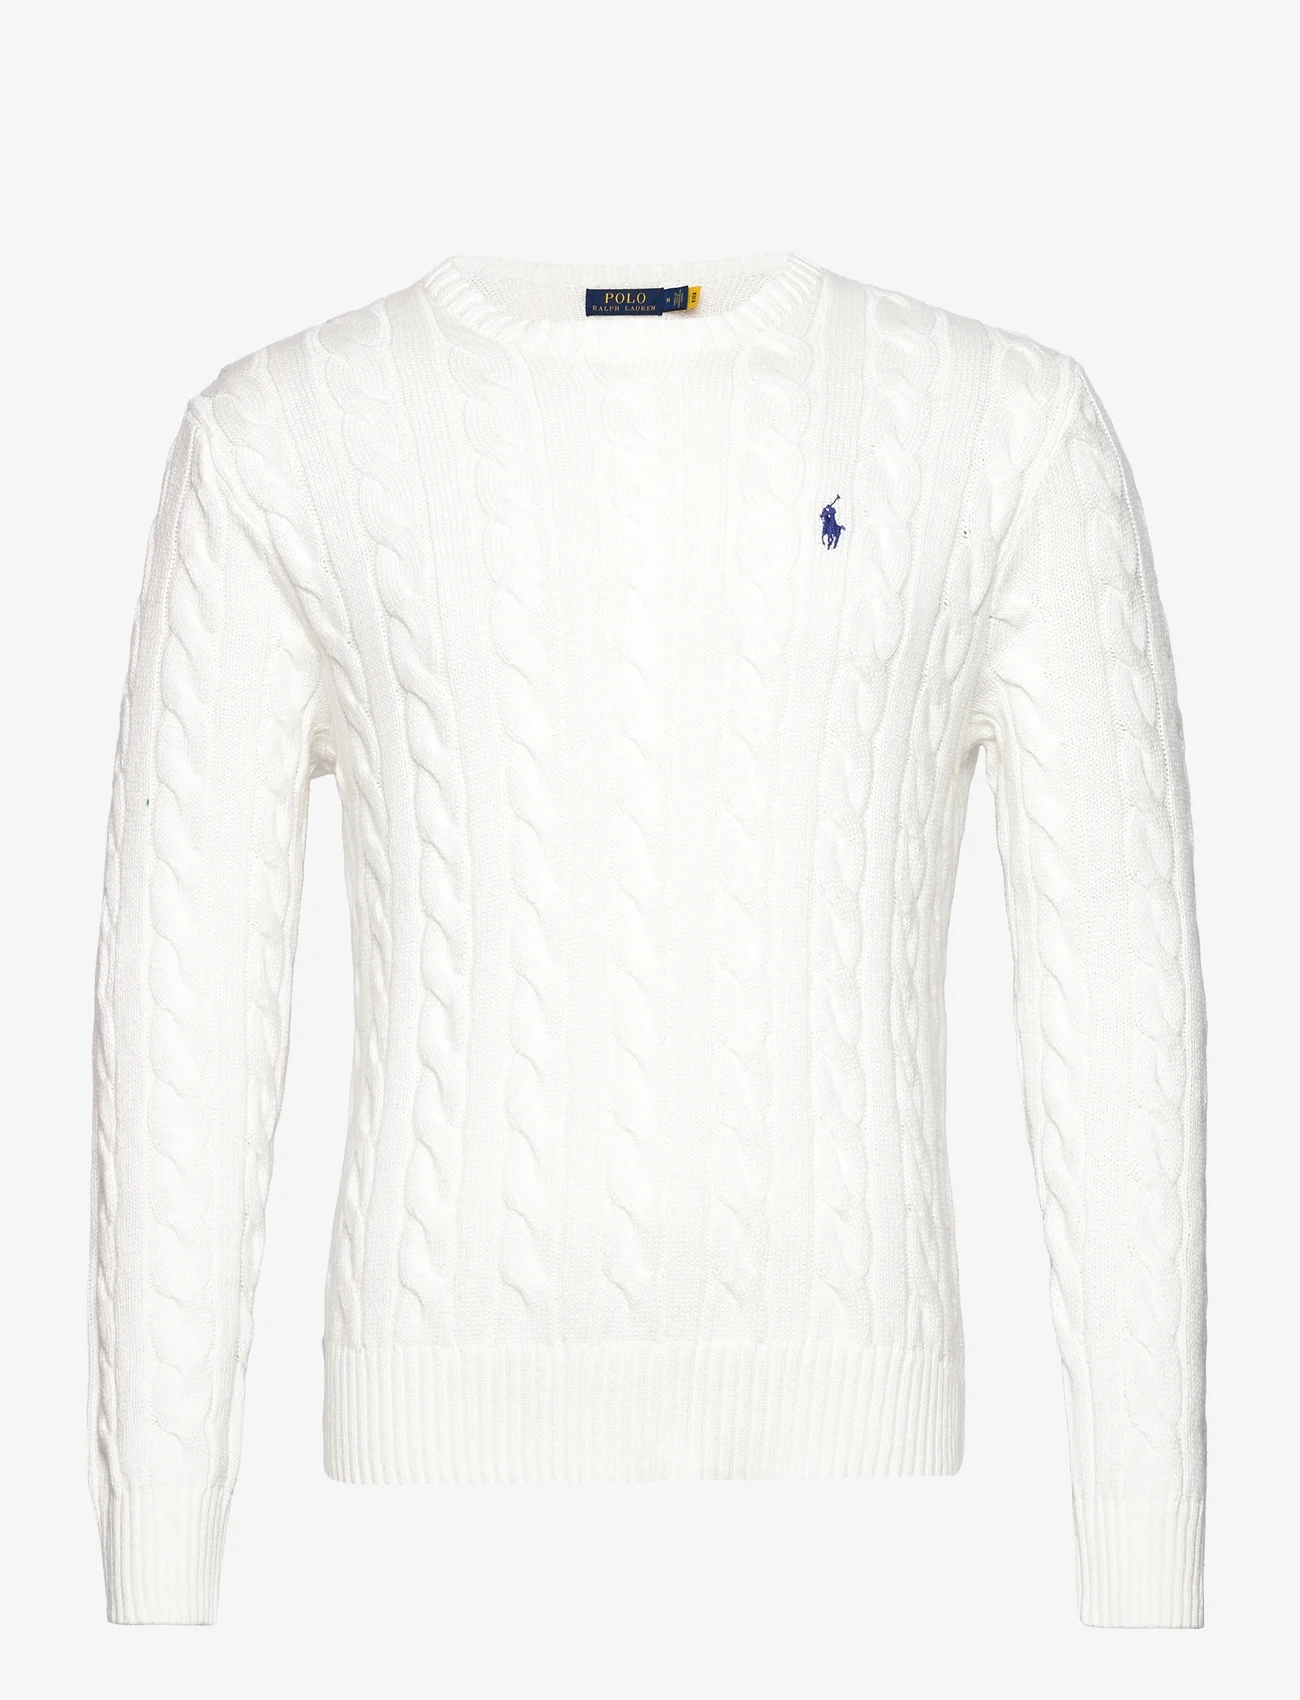 Polo Ralph Lauren - Cable-Knit Cotton Sweater - knitted round necks - white - 1